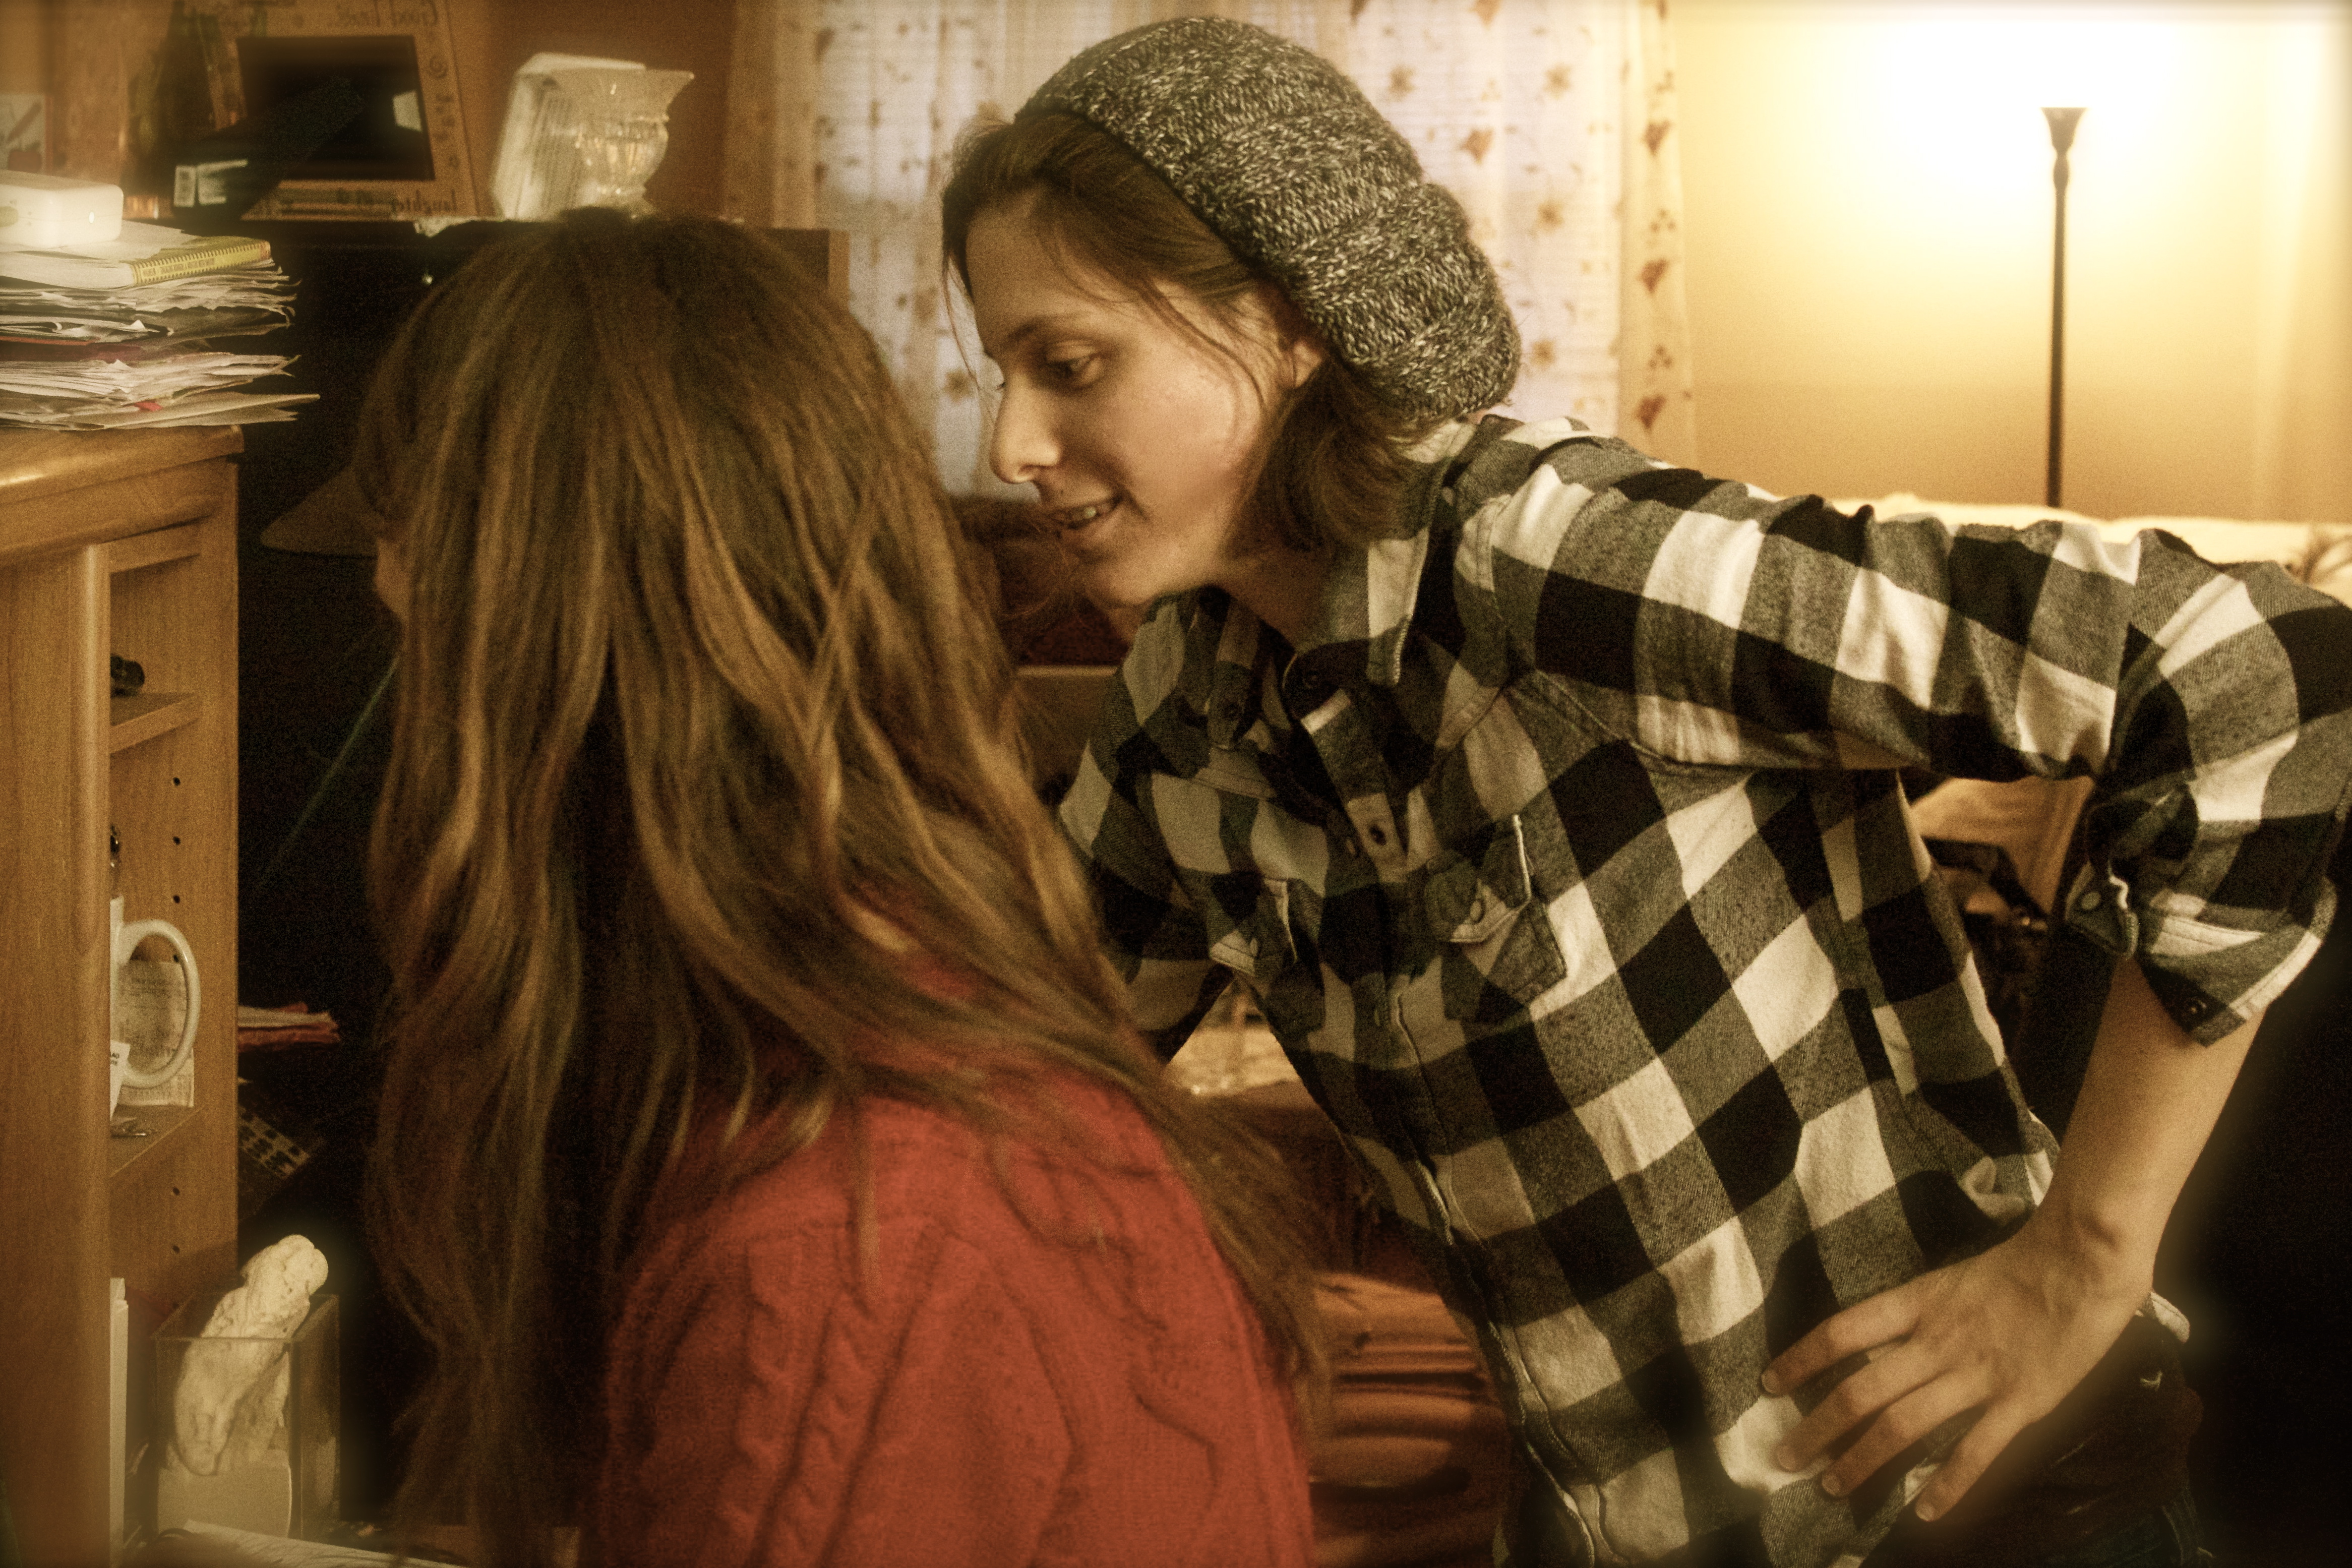 Director Effie Fradelos with Actress Melanie Le Gall on the set of Blooming Road